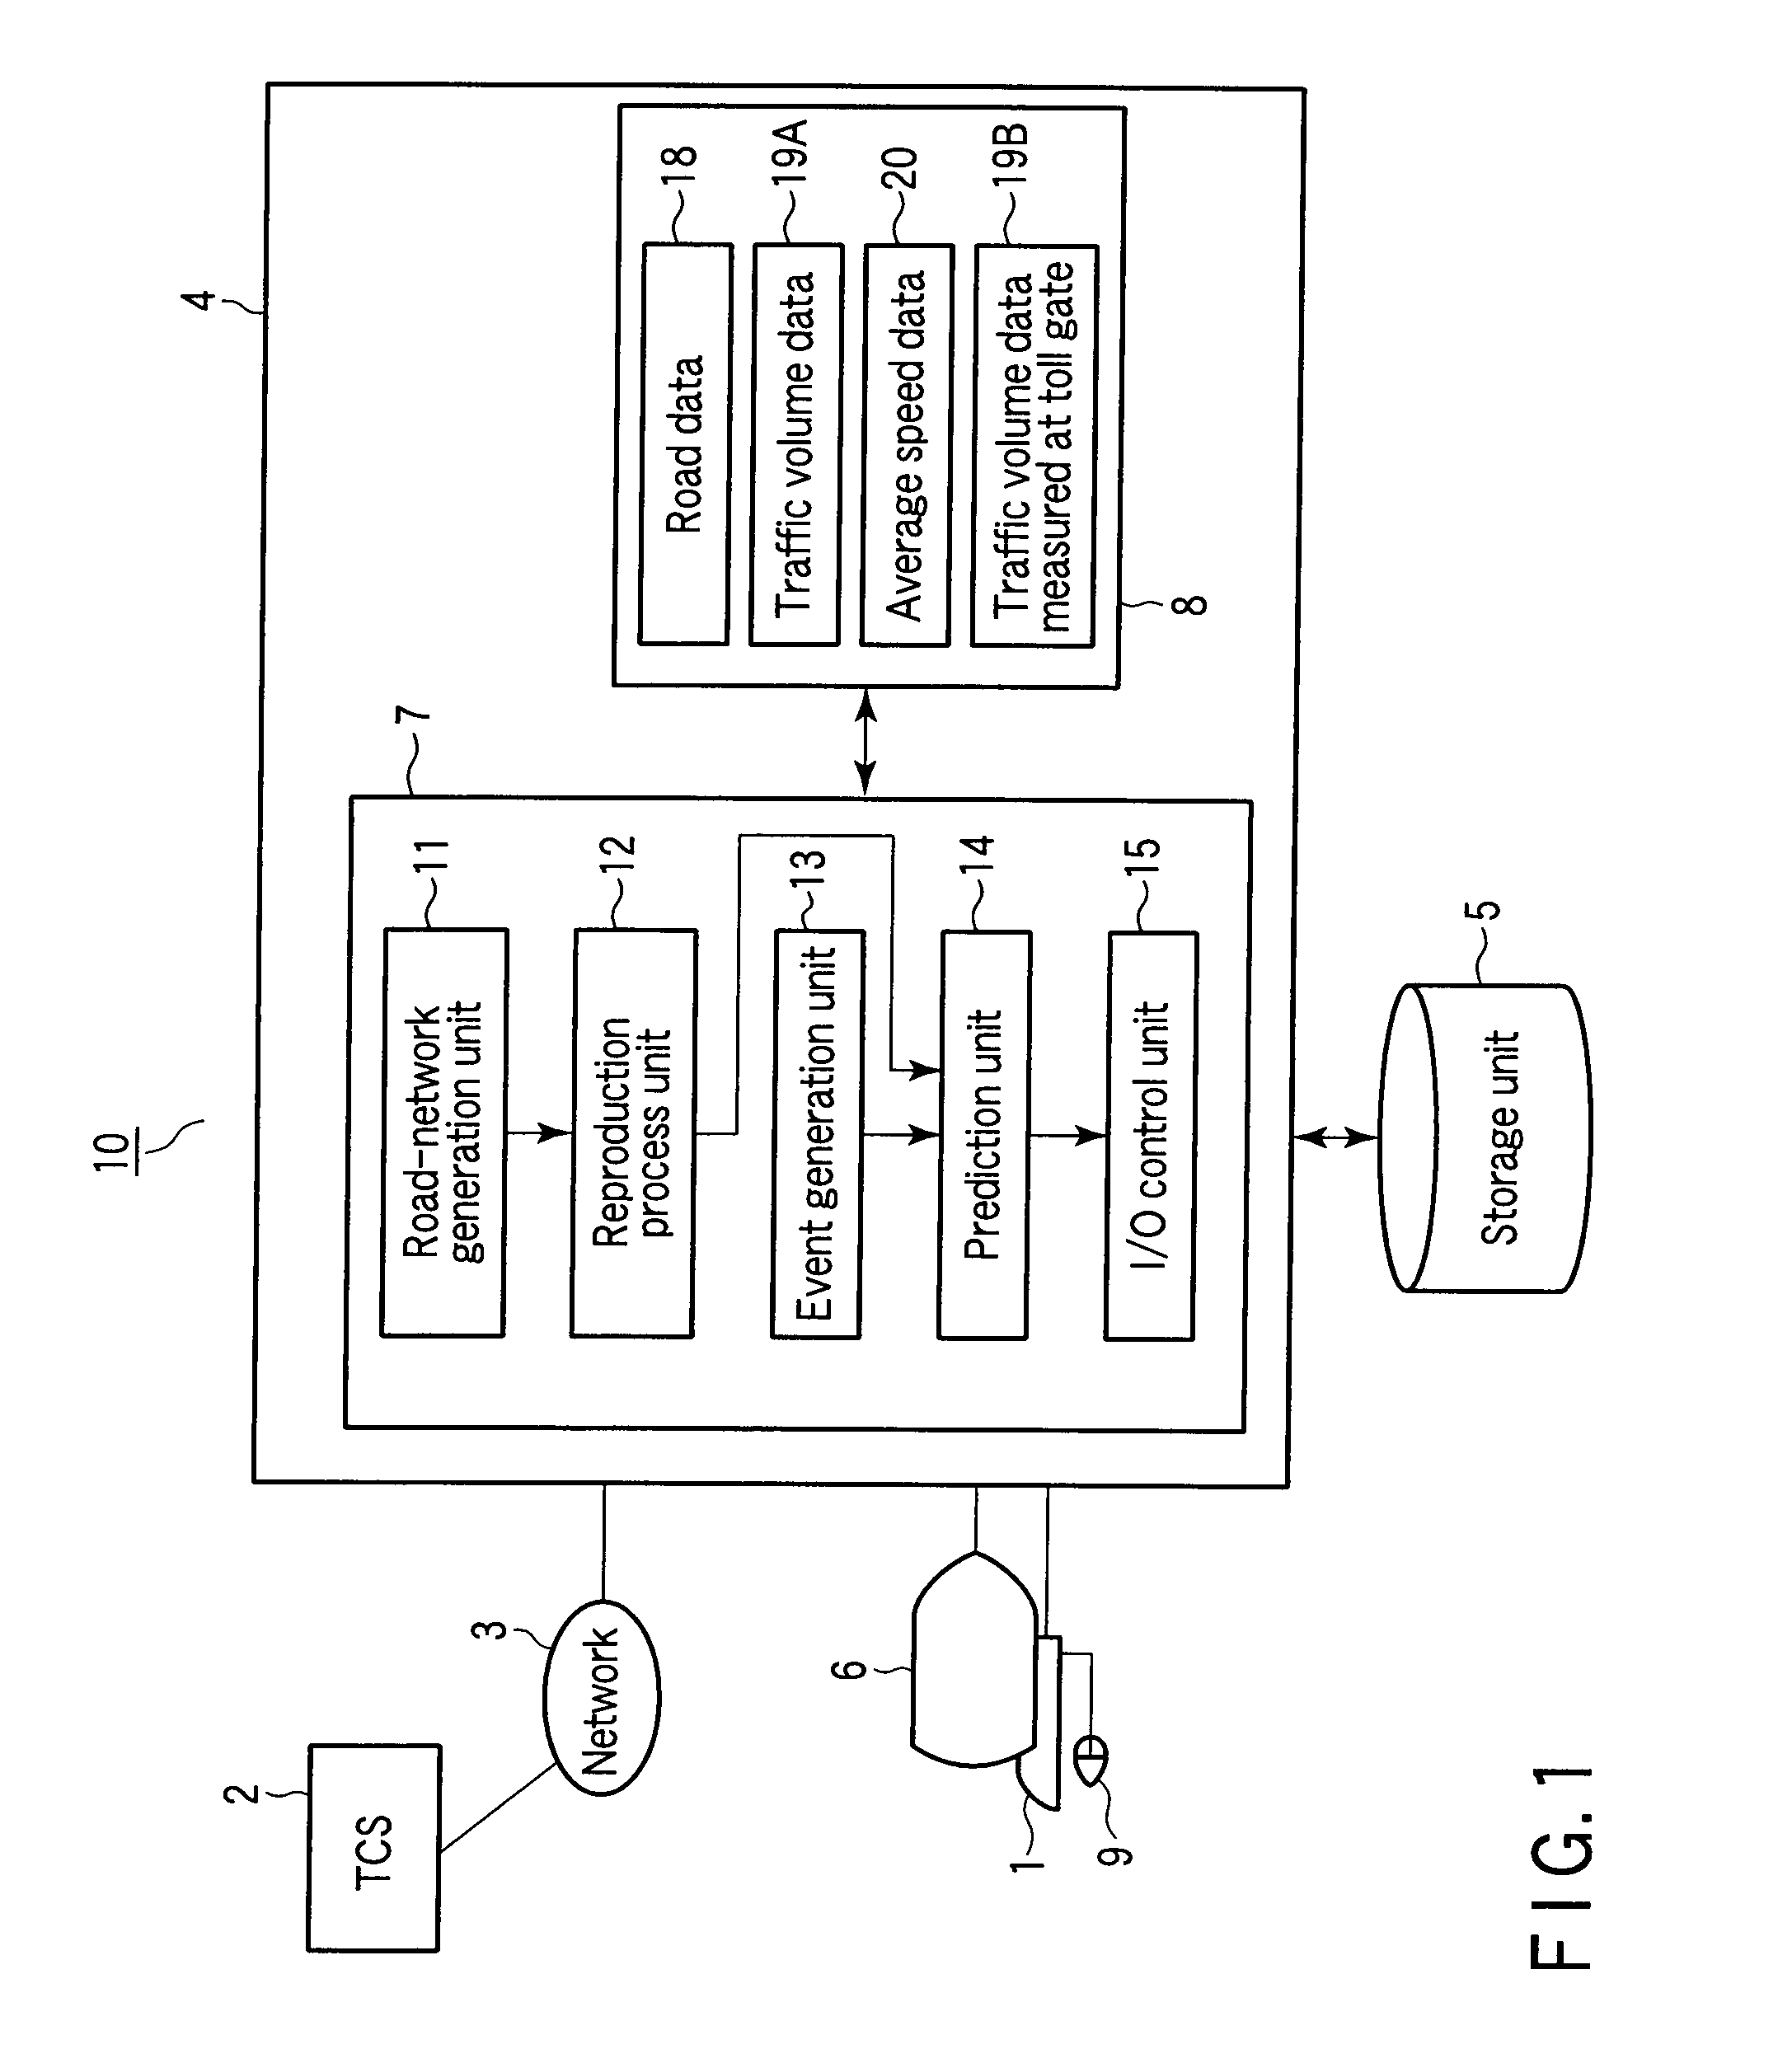 Method and system for traffic simulation of road network